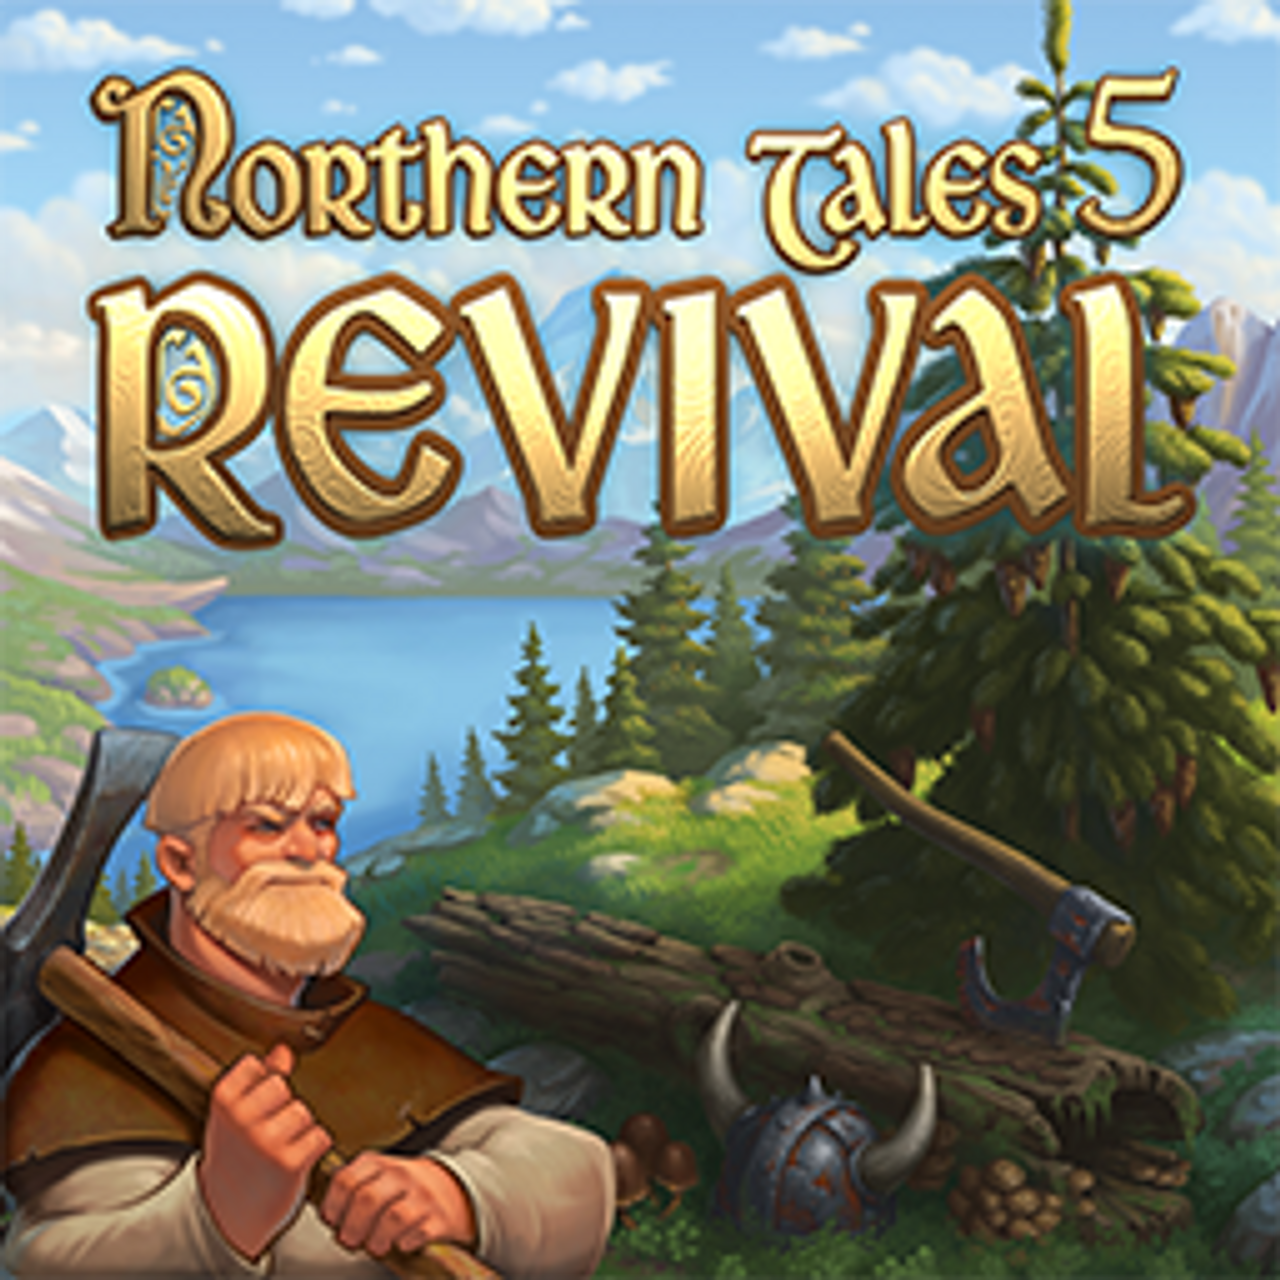 Northern Tale 5: Revival